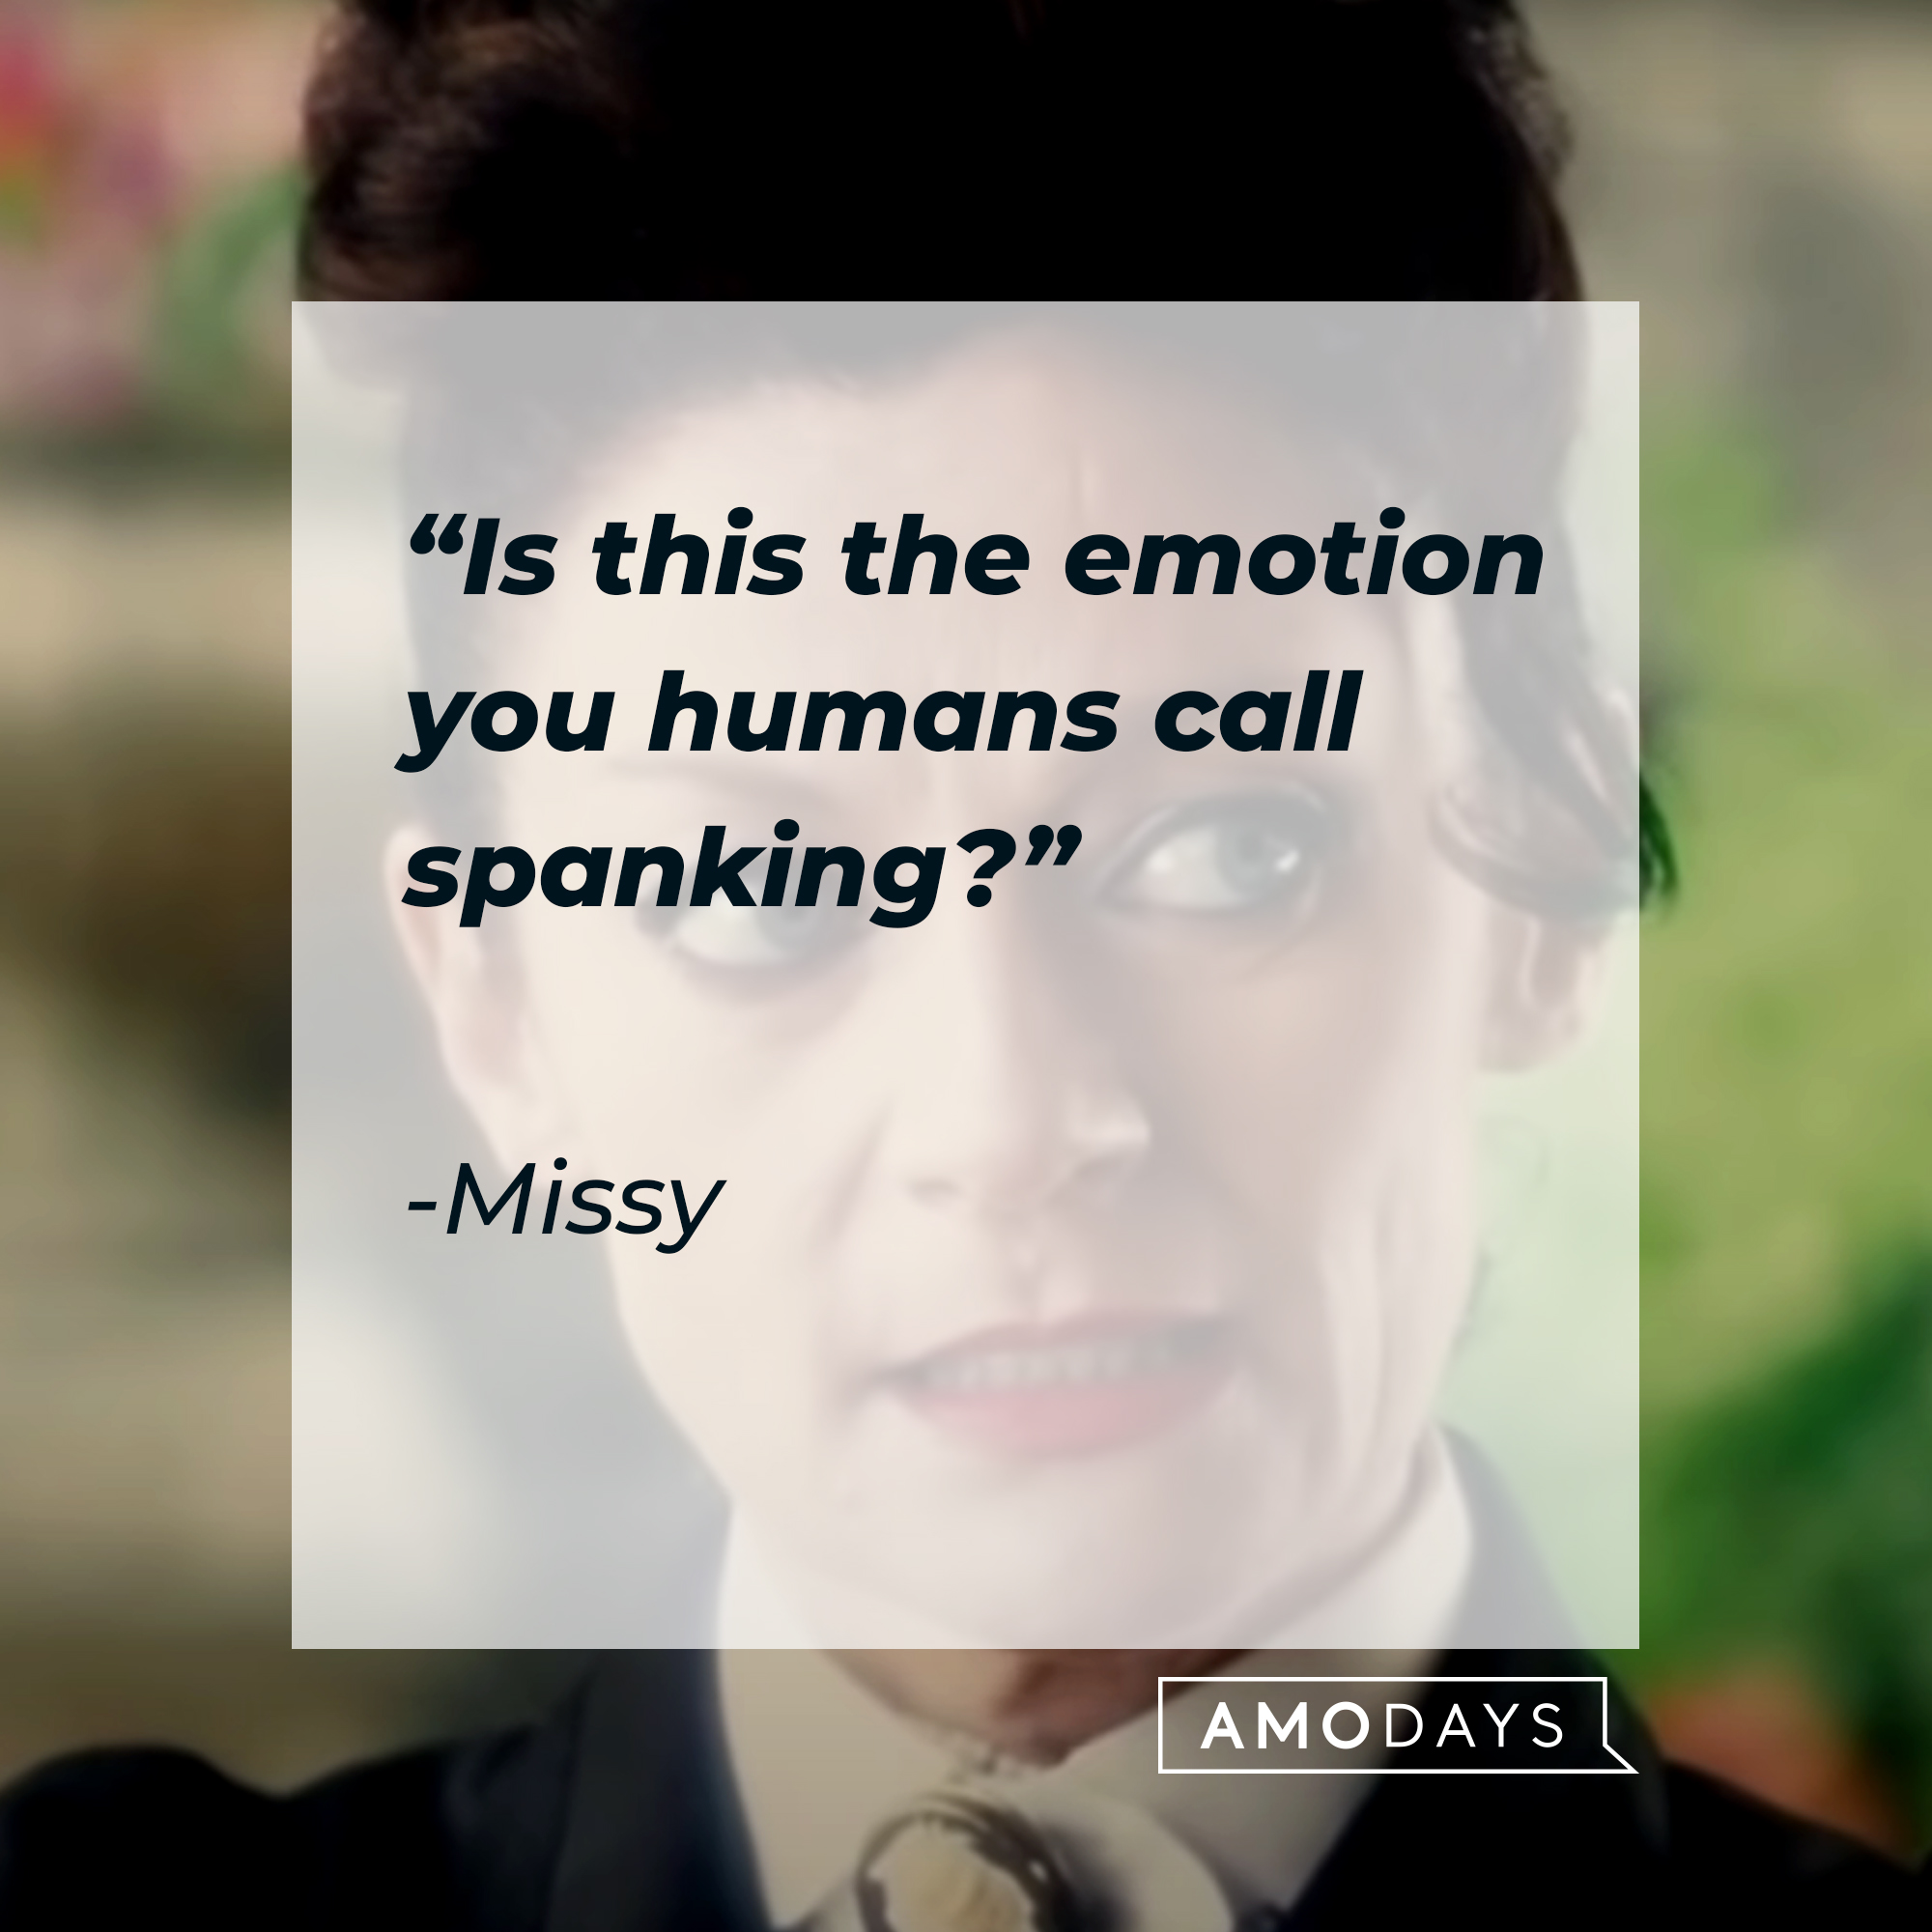 Missy's quote: "Is this the emotion you humans call spanking?" | Source: youtube.com/DoctorWho